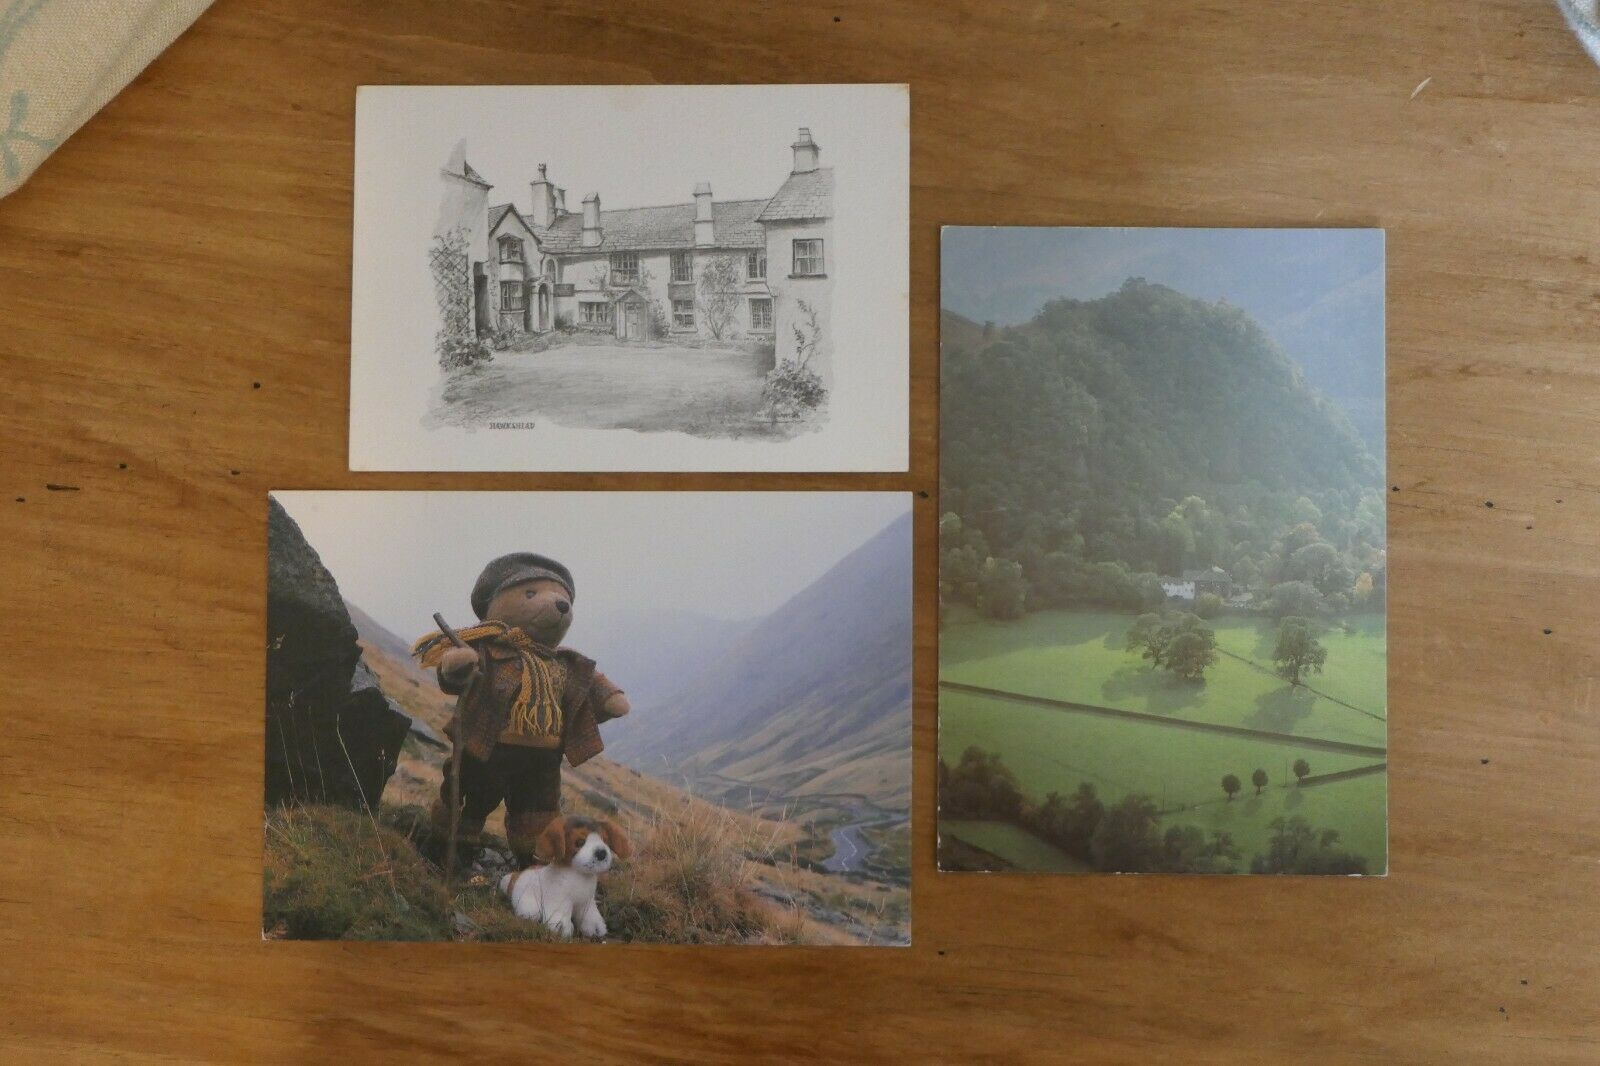 House Clearance - Lake District, England - set of 3 services